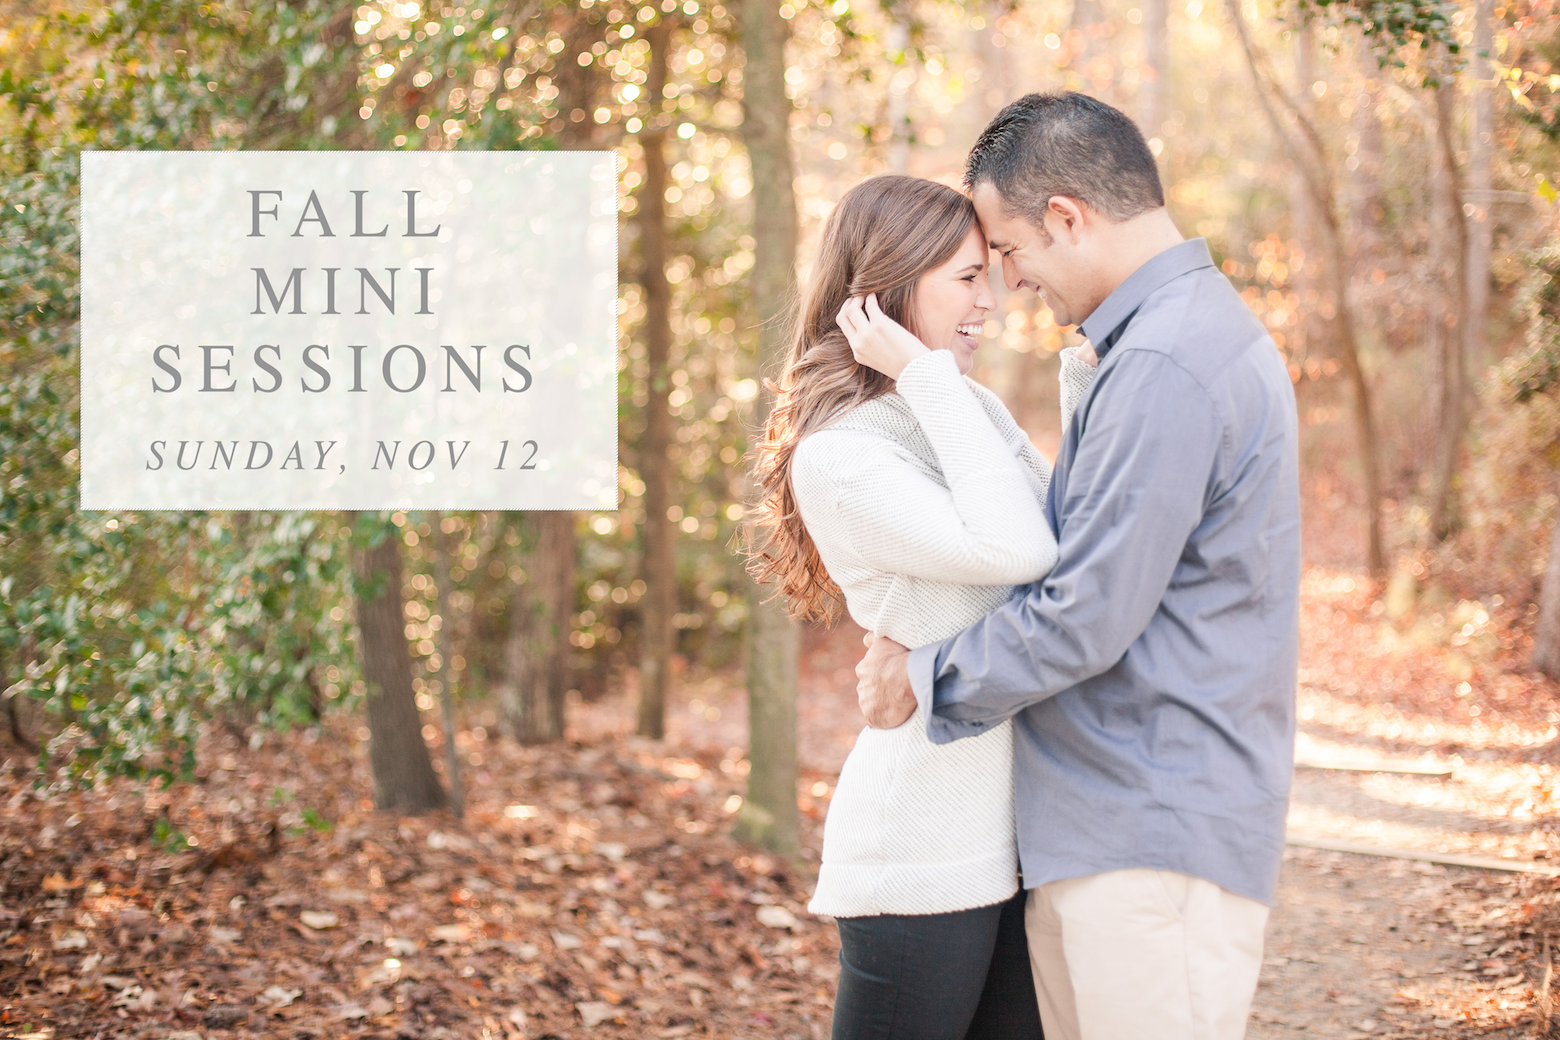 Fall Mini Sessions in Newport News by Angie McPherson Photography